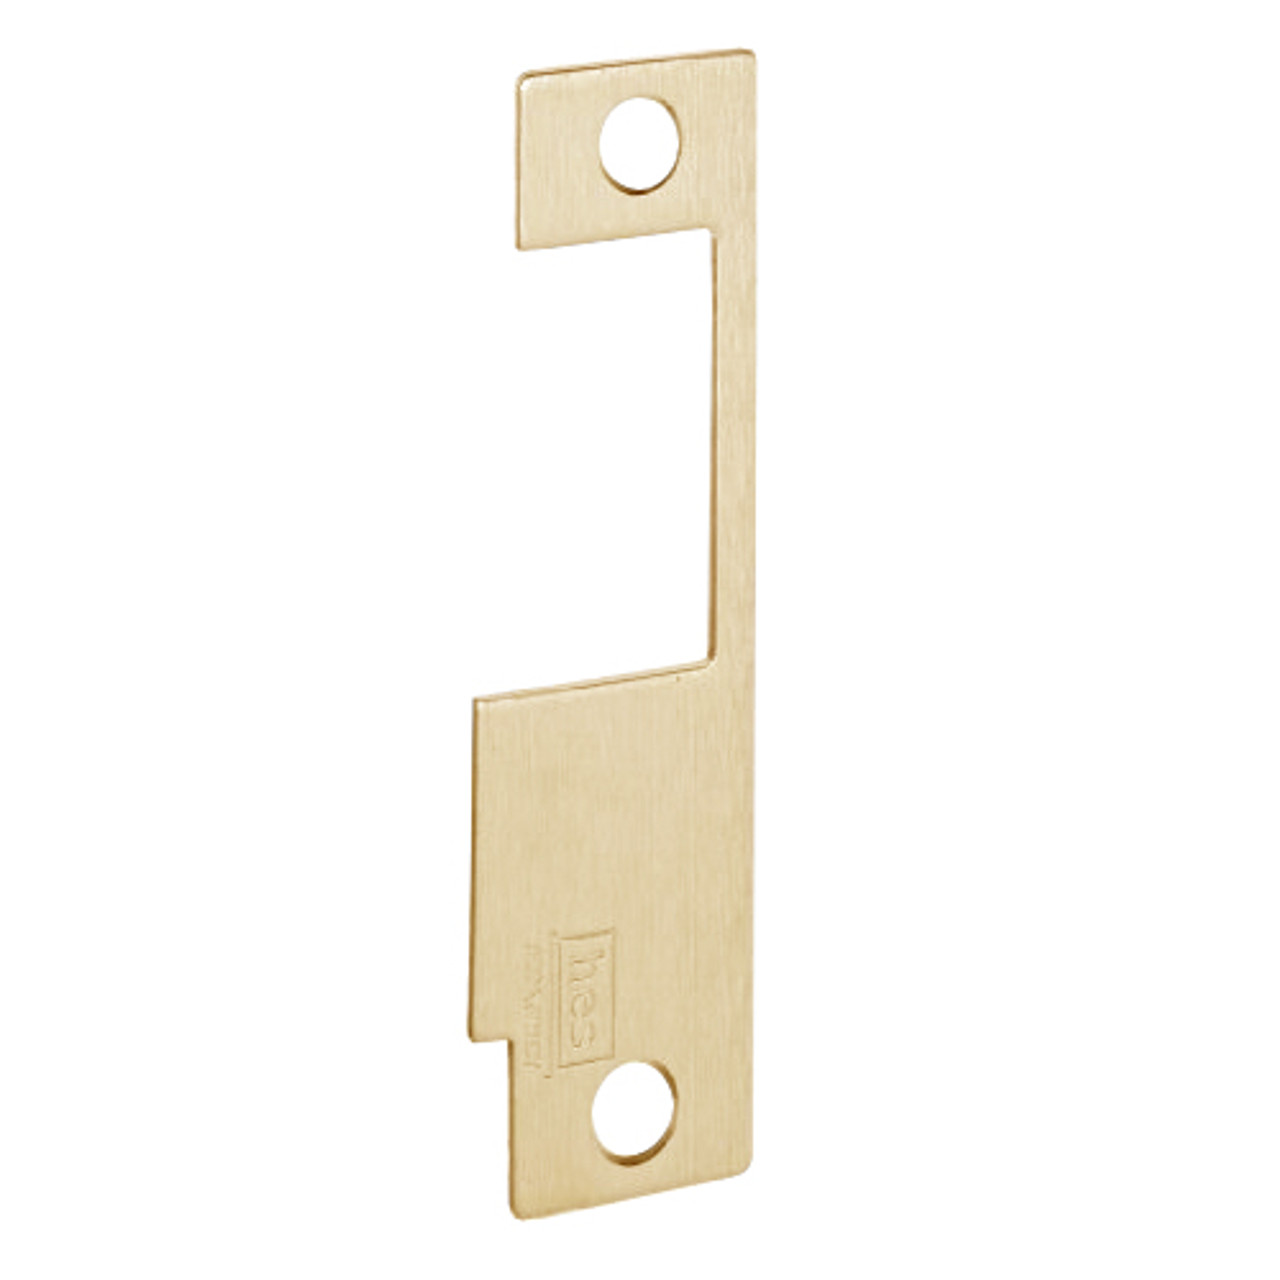 852M-606 Hes 4-7/8" x 1-1/4" Faceplate in Satin Brass Finish